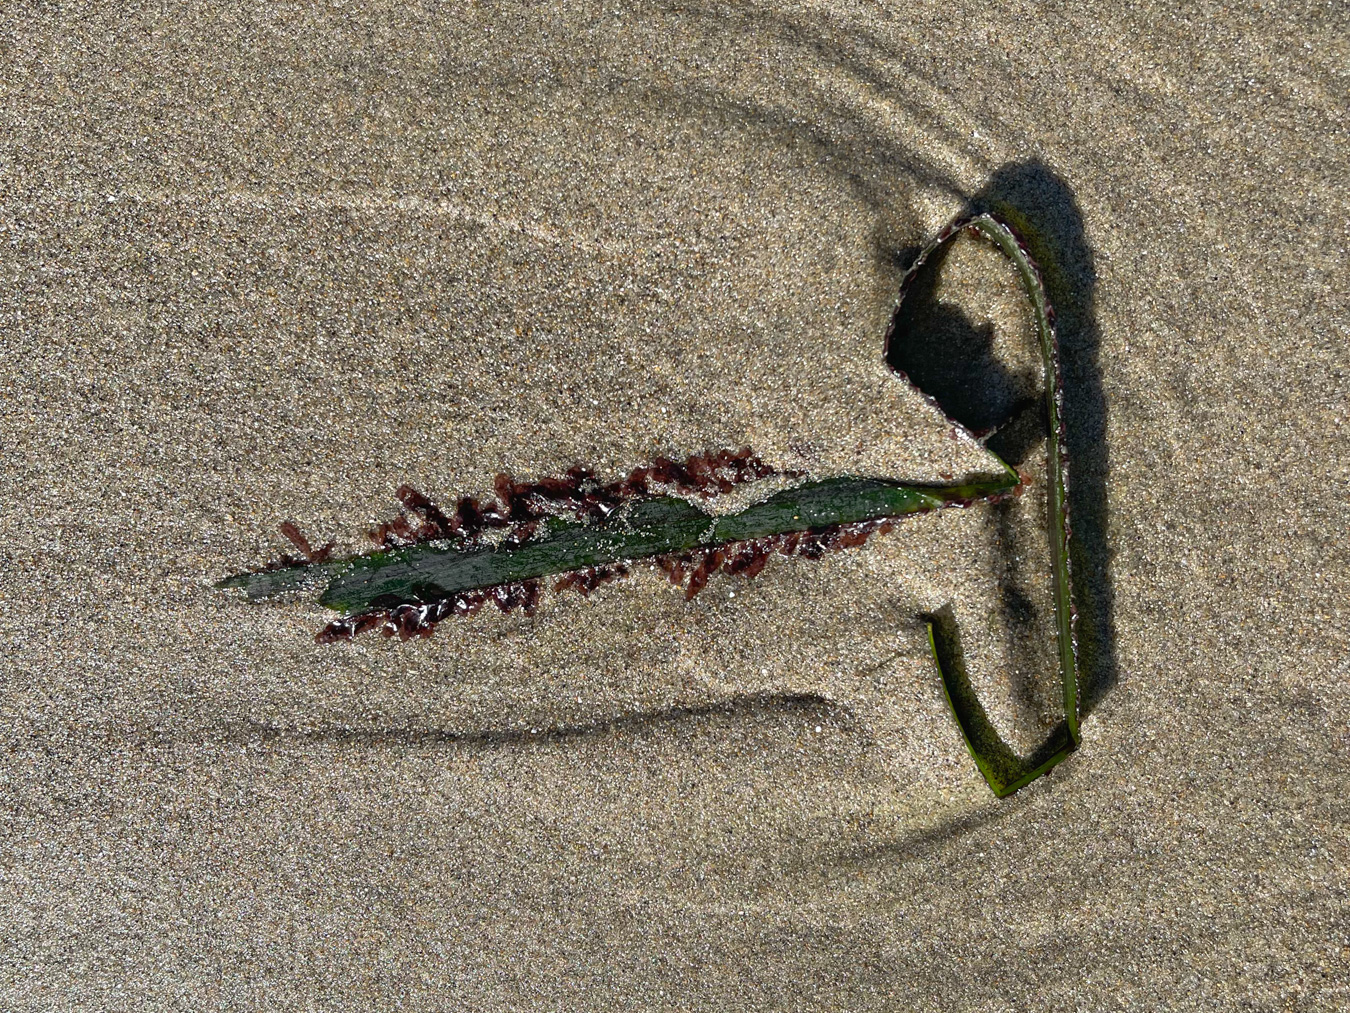 A single zoster blade on wet sand. Smithora along its edges